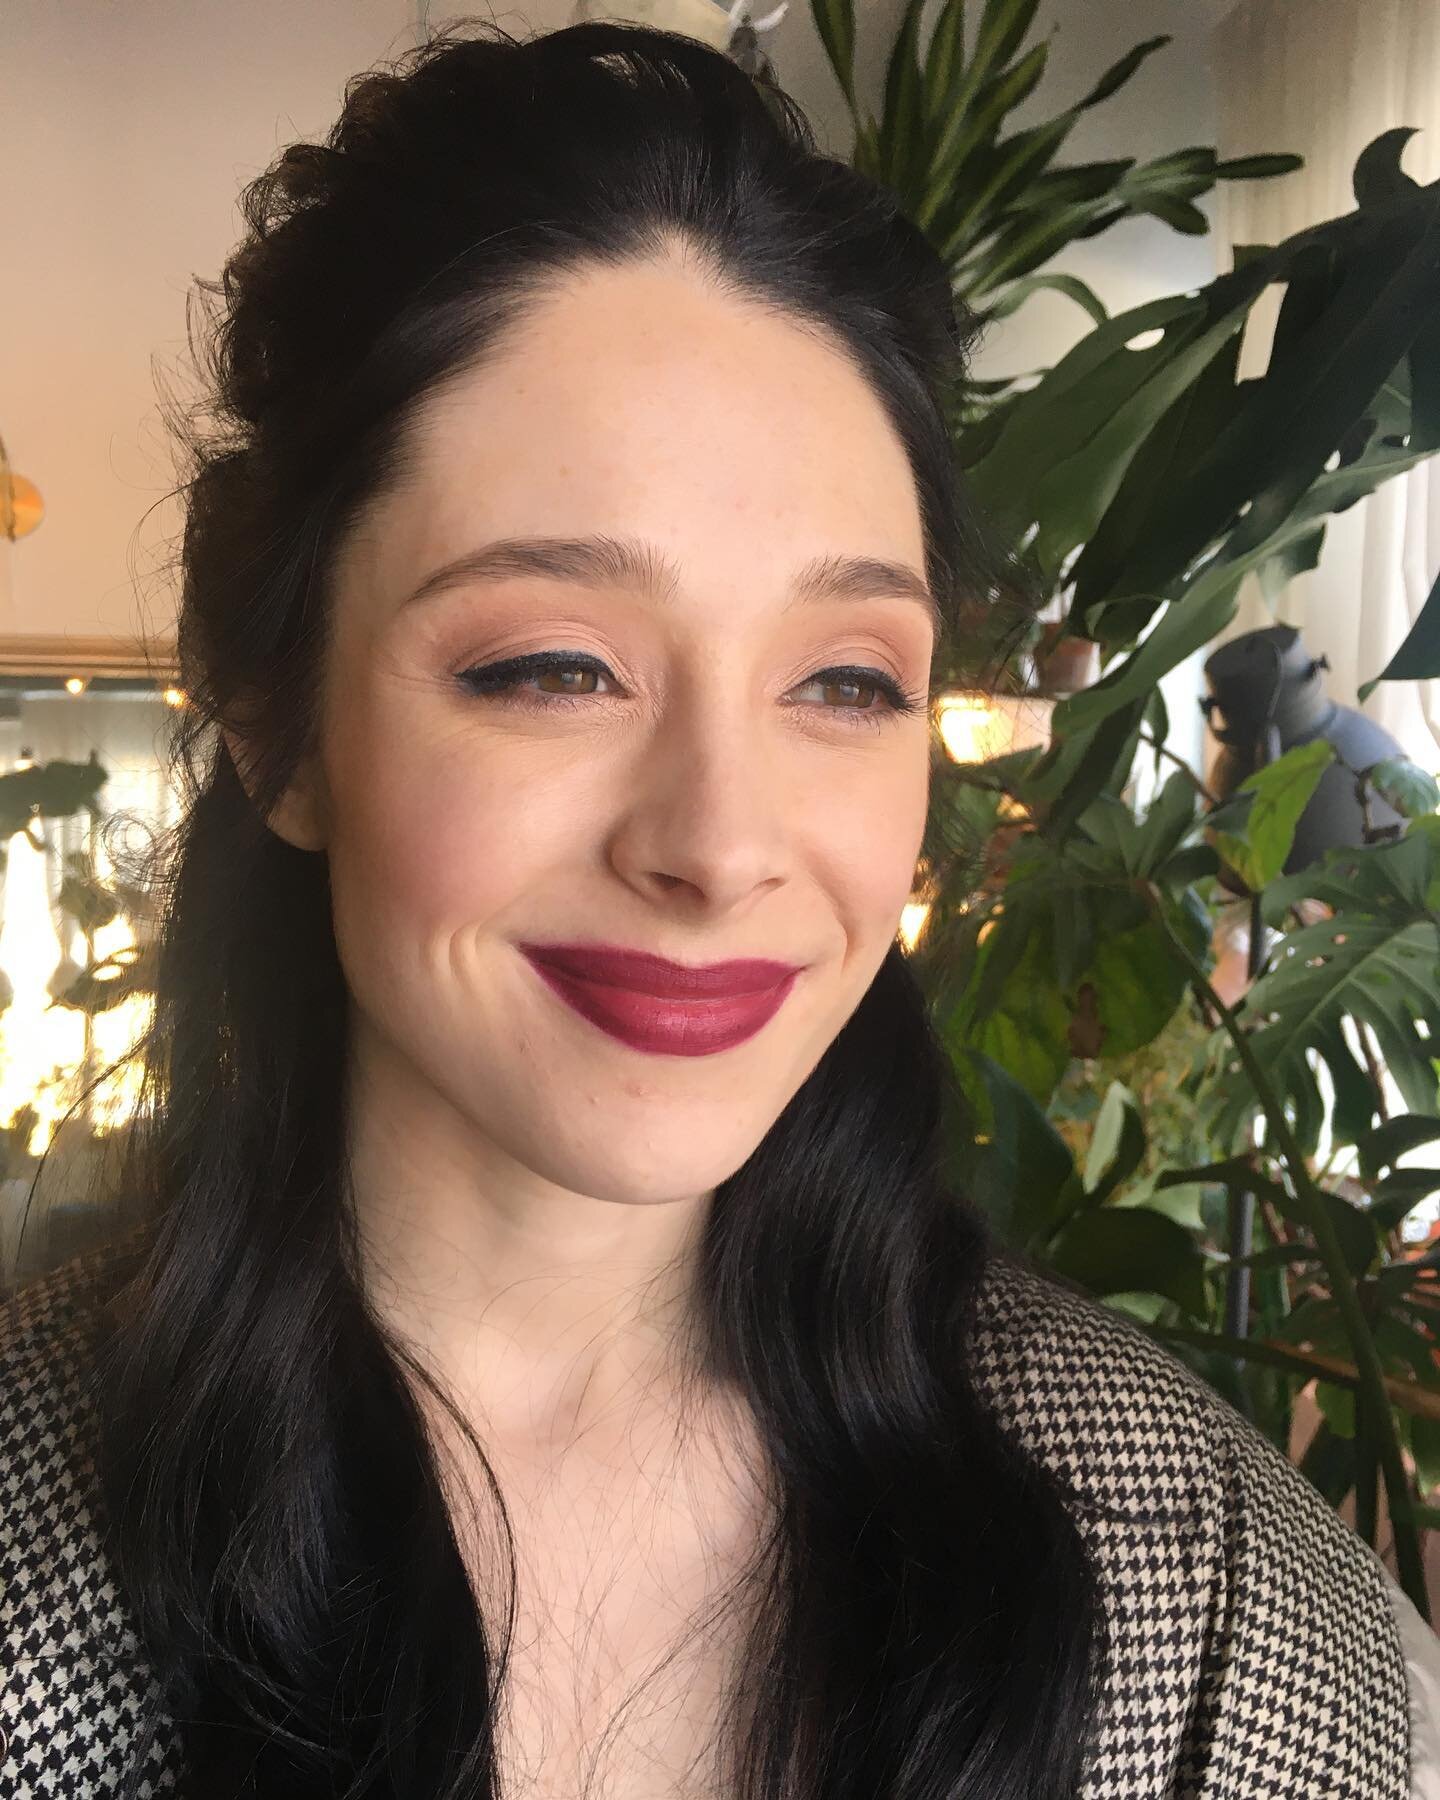 Straight from my 6s camera with natural light #nofilter of this gorgeous engaged beauty. Going for a fall look for her porcelain complexion. Adore this look and lip on her! 💋
Hair / @samfayedoeshair Makeup / #christinadaltonbeauty Team /@nikavaughan